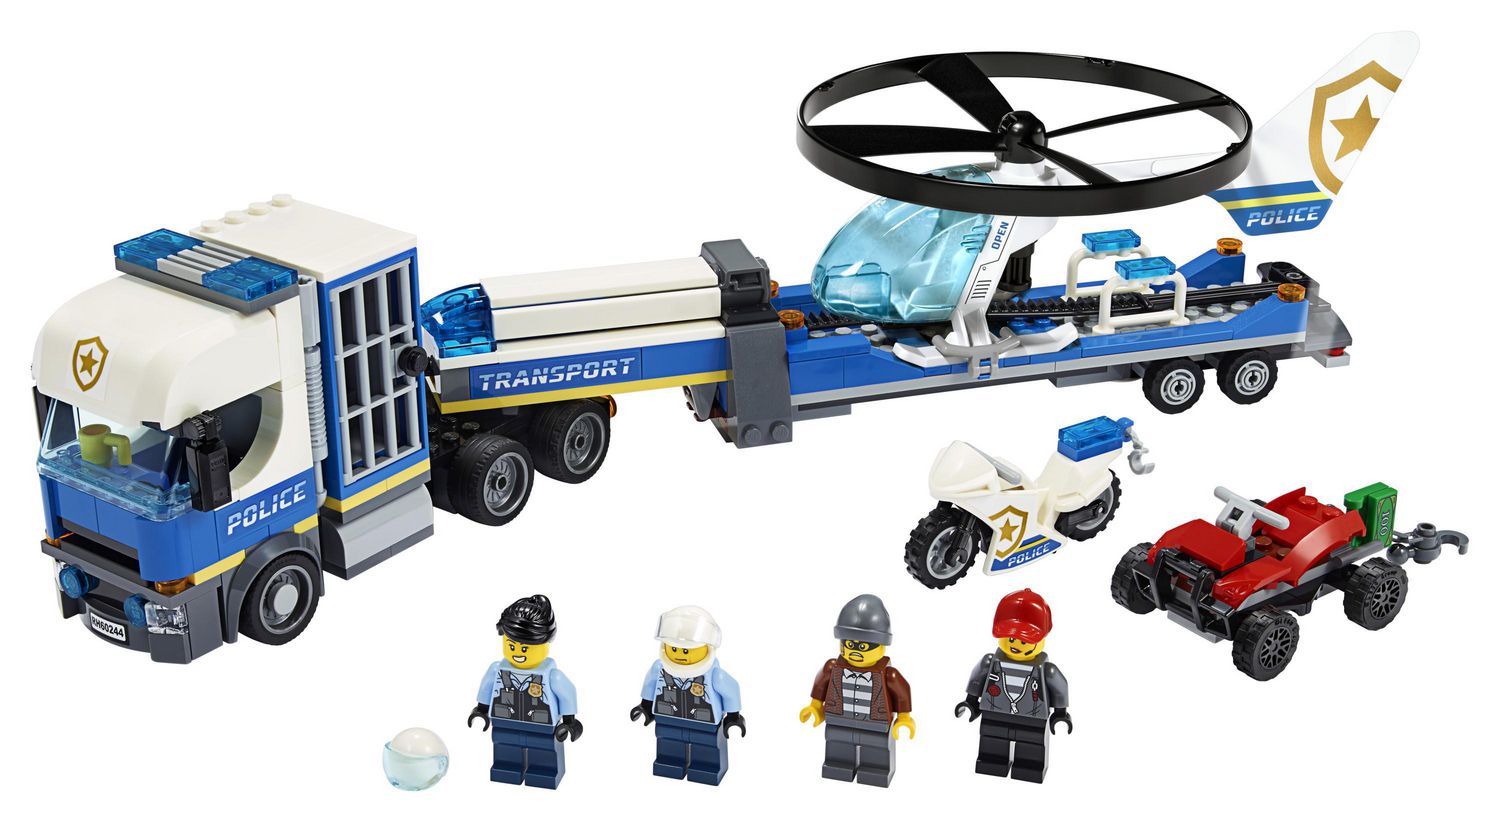 LEGO City Police Helicopter Transport 60244 Toy Building Kit (317